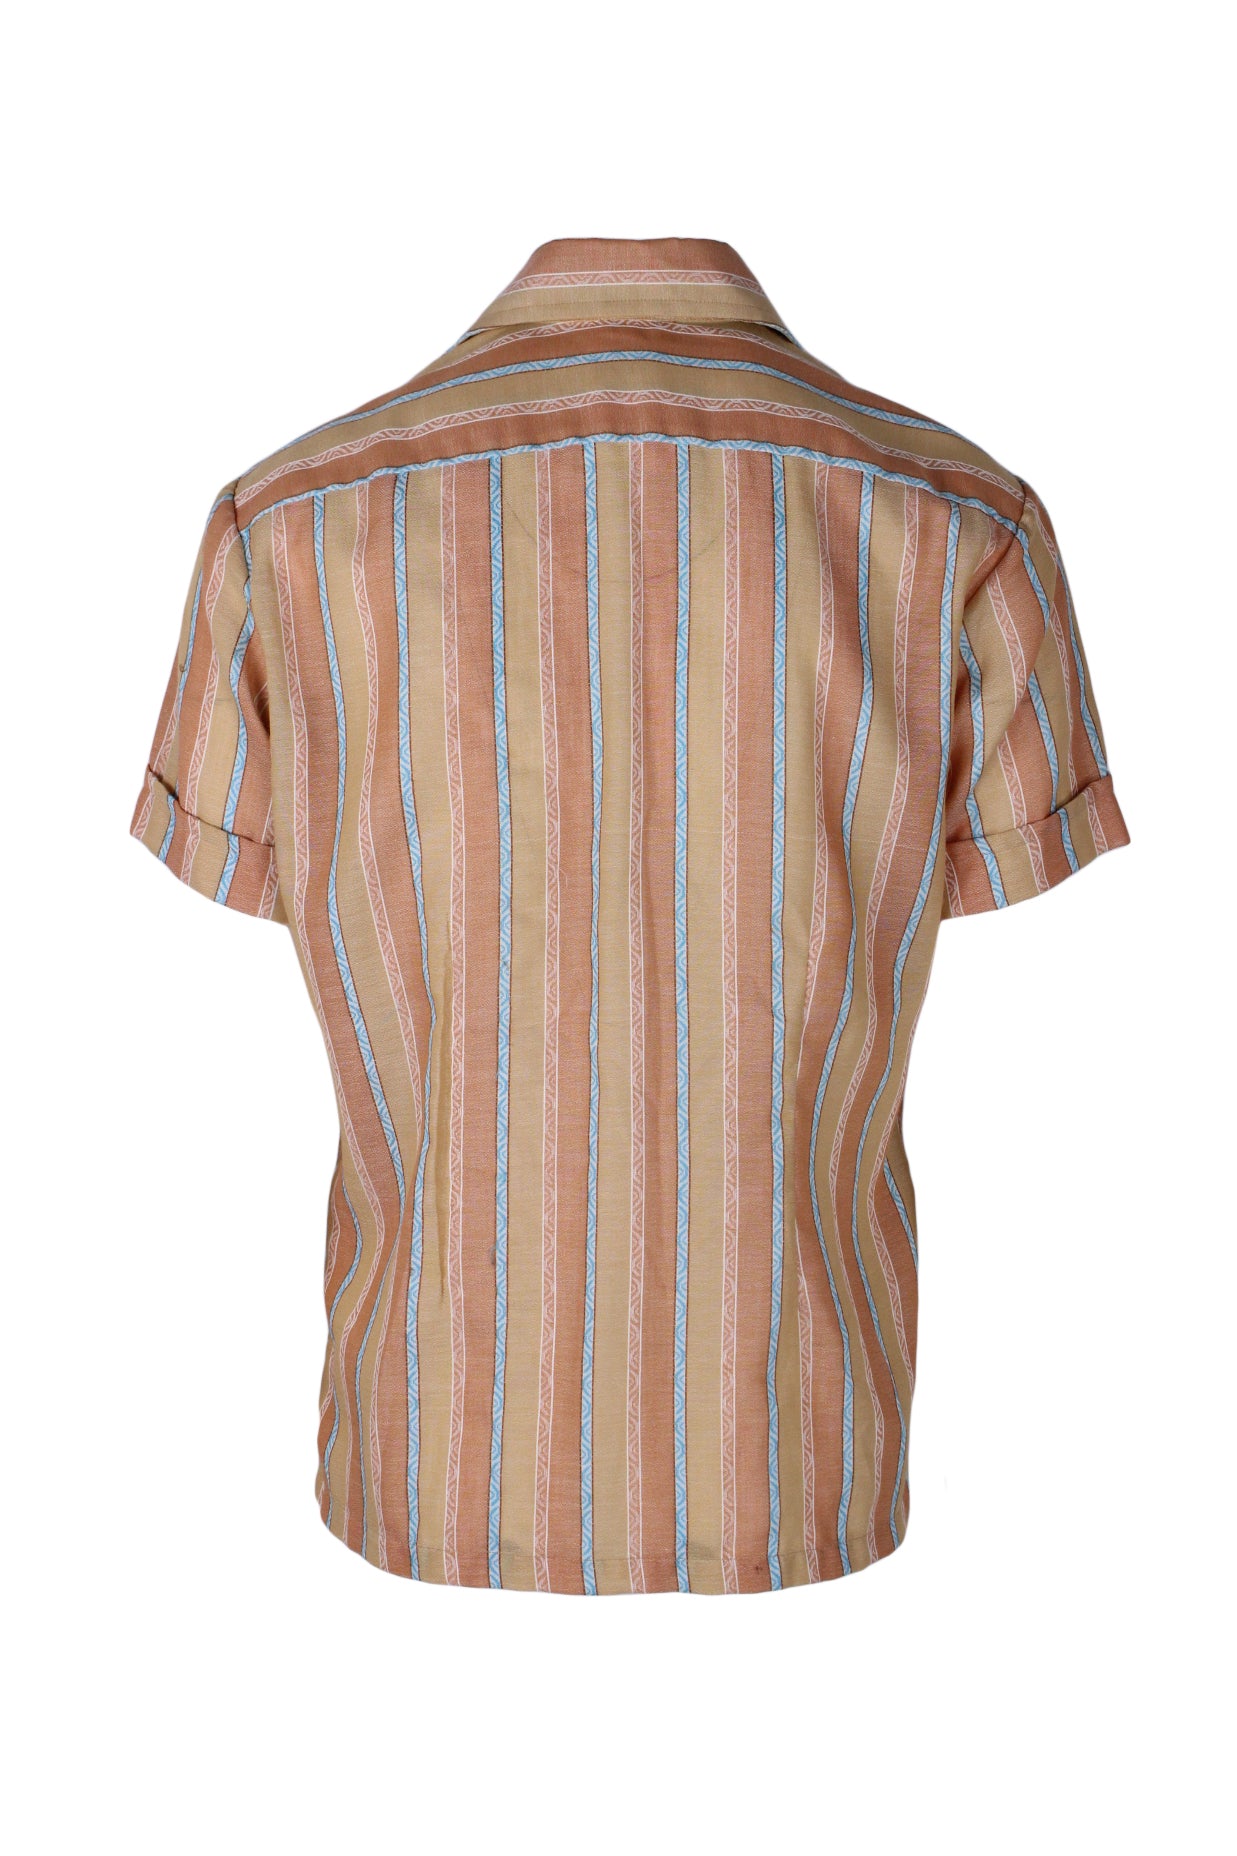 rear view with stripes throughout of shirt.